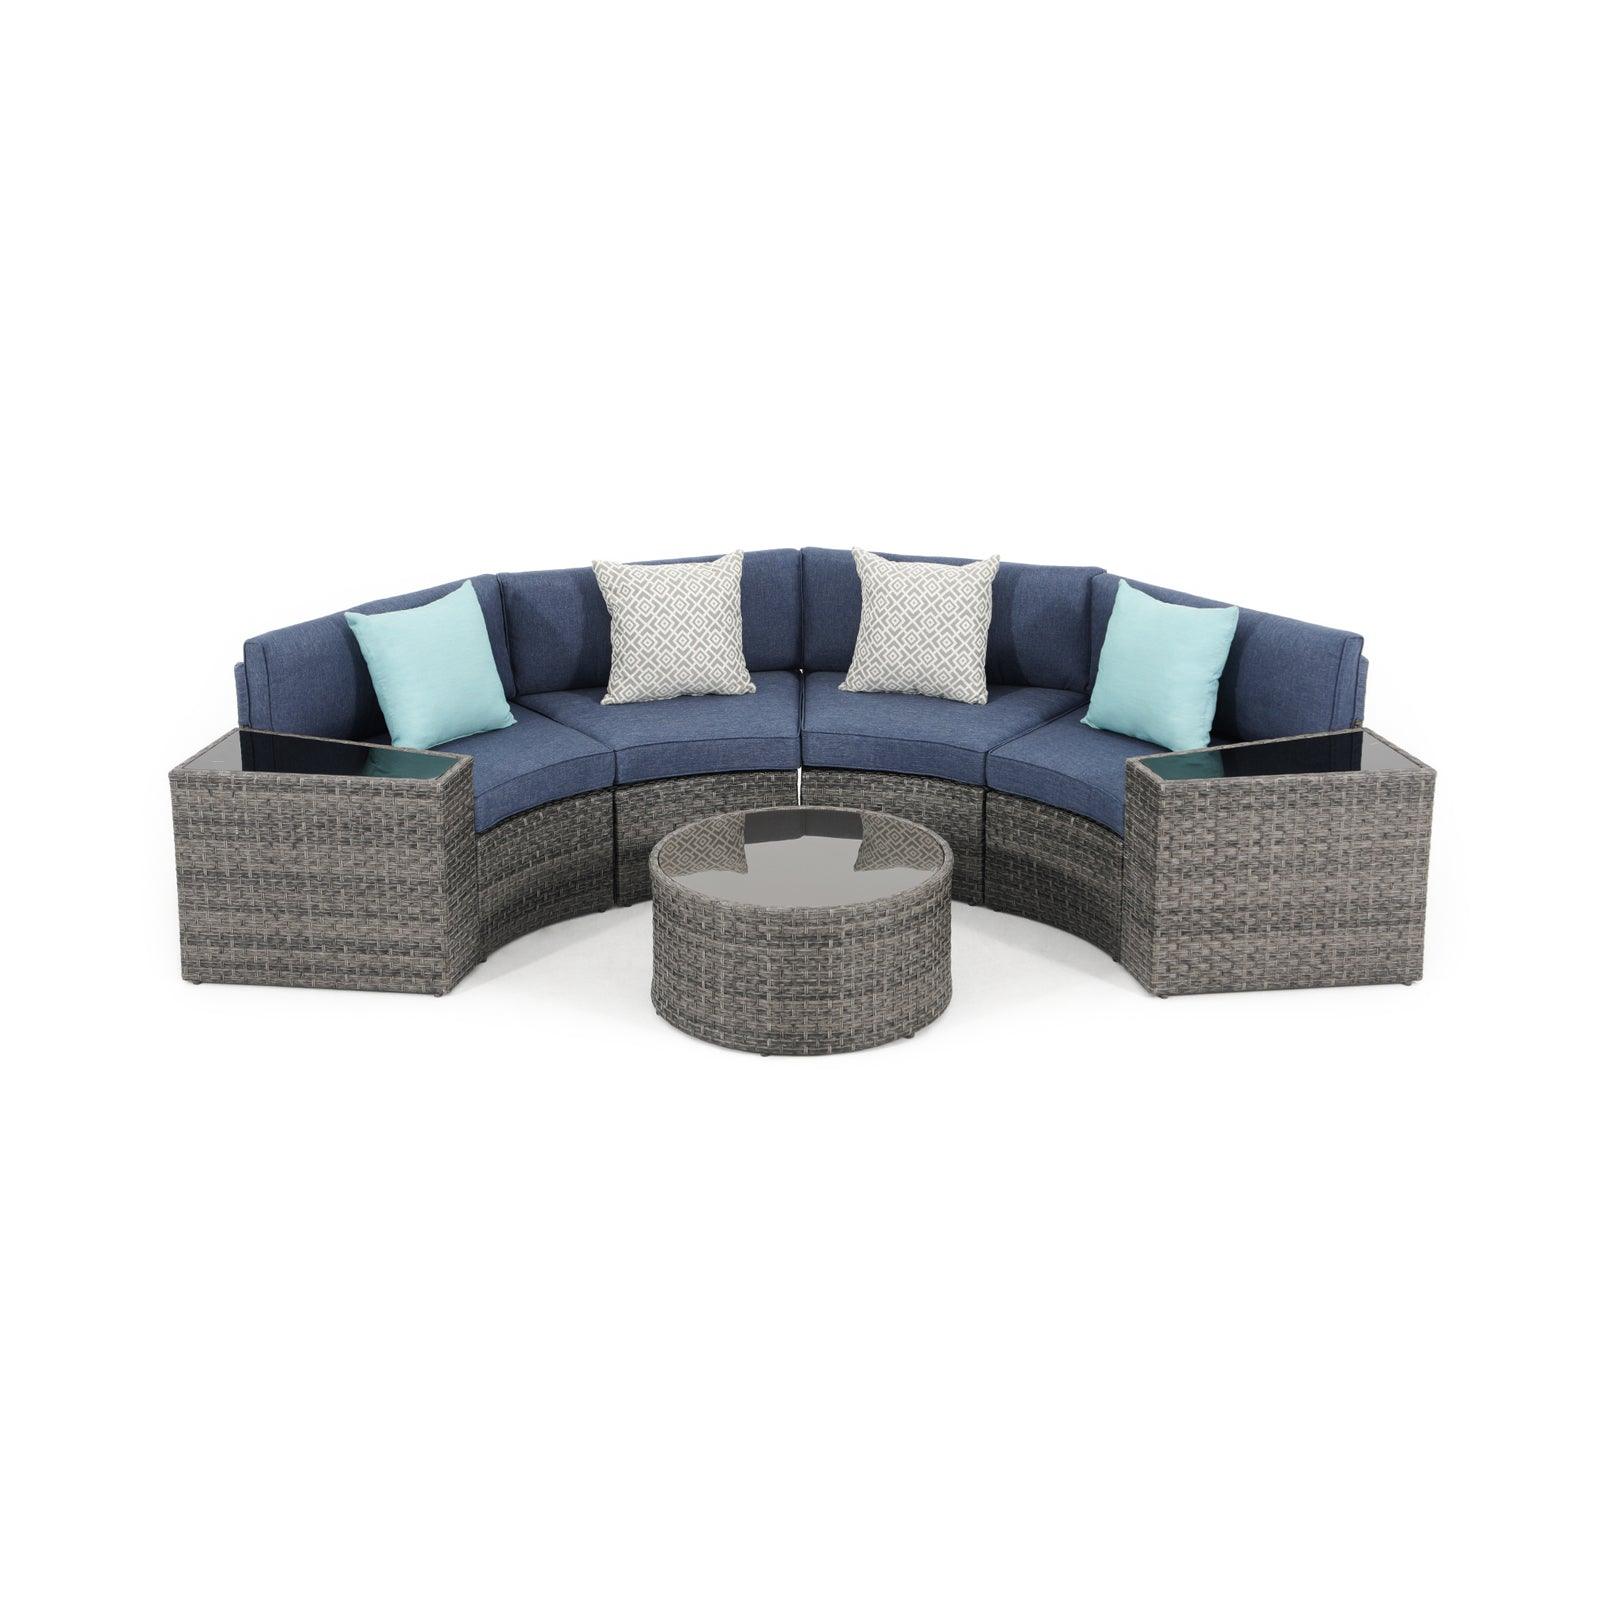 Boboli 7-piece Grey Wicker Curved Sectional Set with navy blue cushions, 1 Round Glass Table + 2 glass top side tables + 4 sectional sofas, front- Jardina Furniture #color_Navy Blue #piece_7-pc.